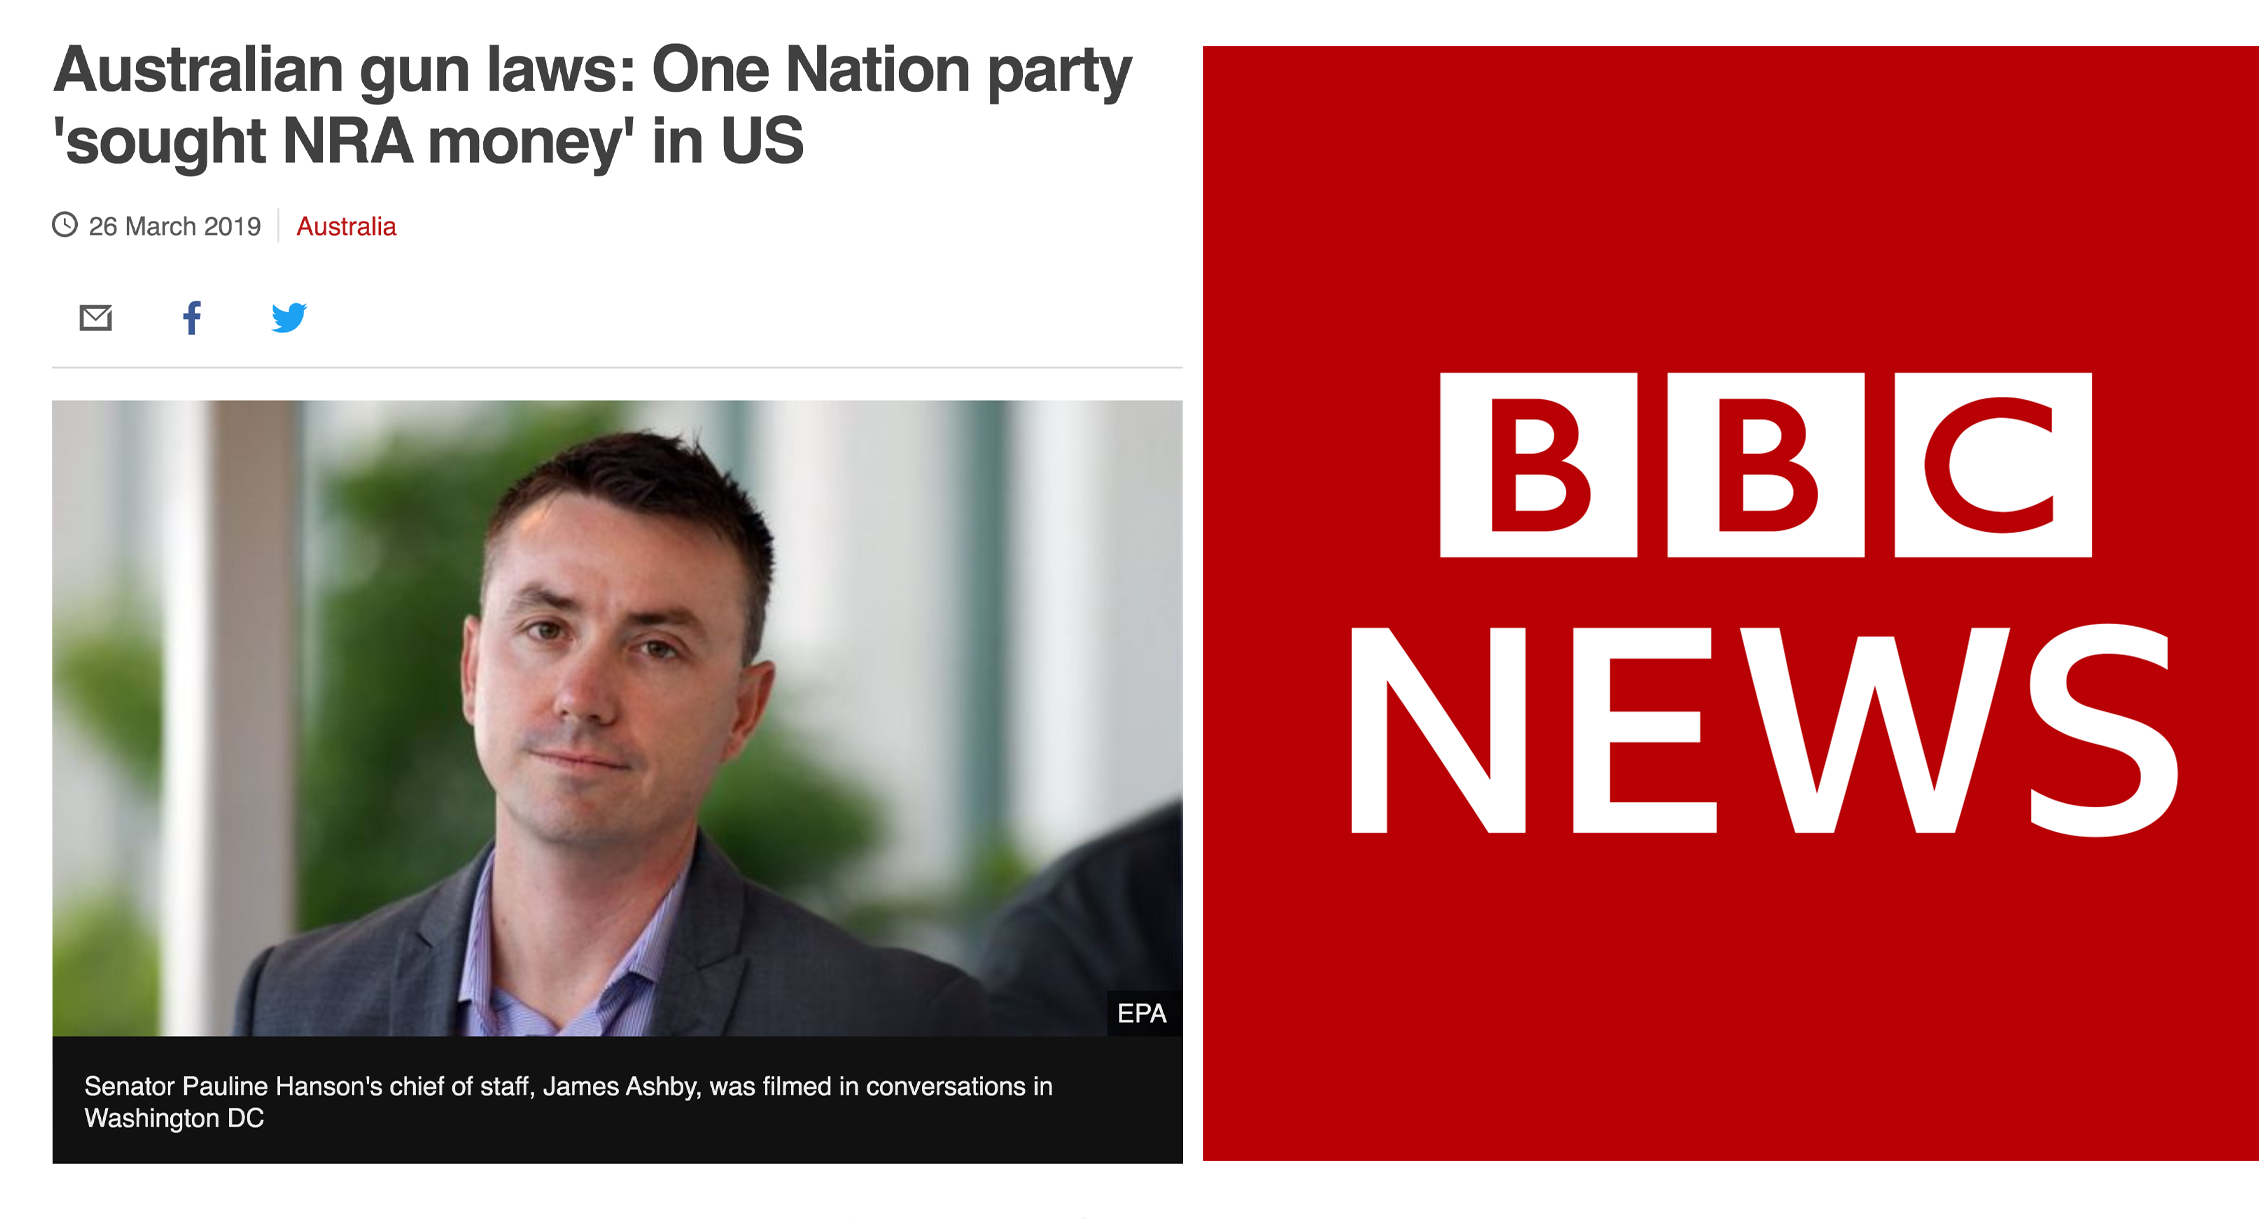 BBC: One Nation party 'sought NRA money'